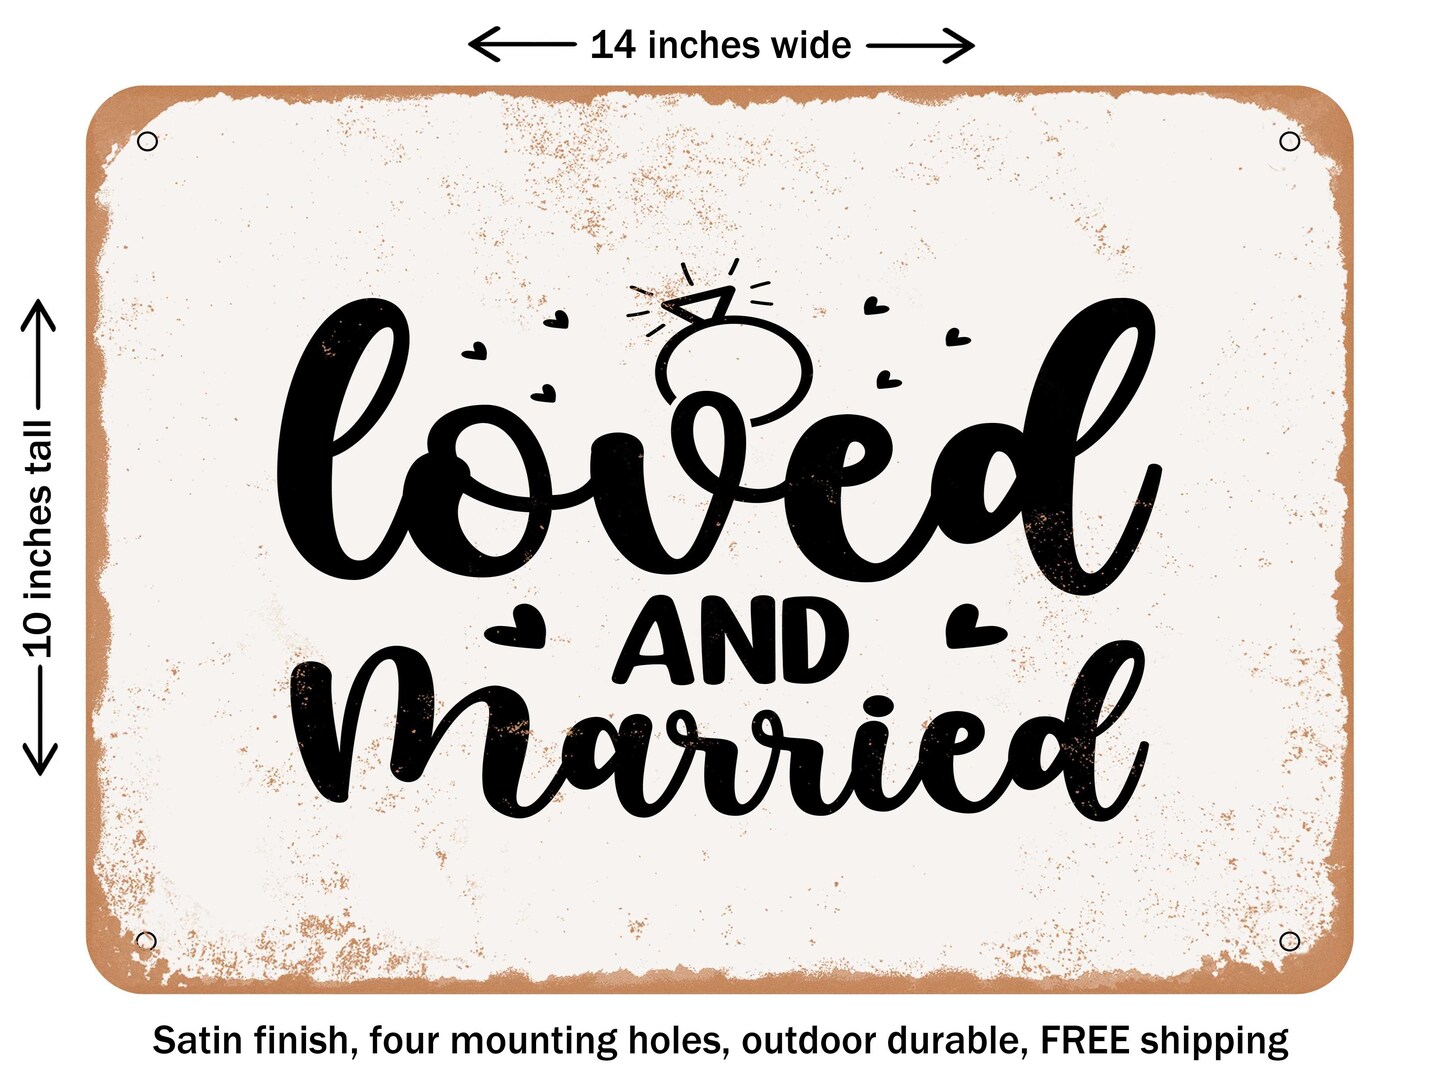 DECORATIVE METAL SIGN - Loved and Married - 2 - Vintage Rusty Look